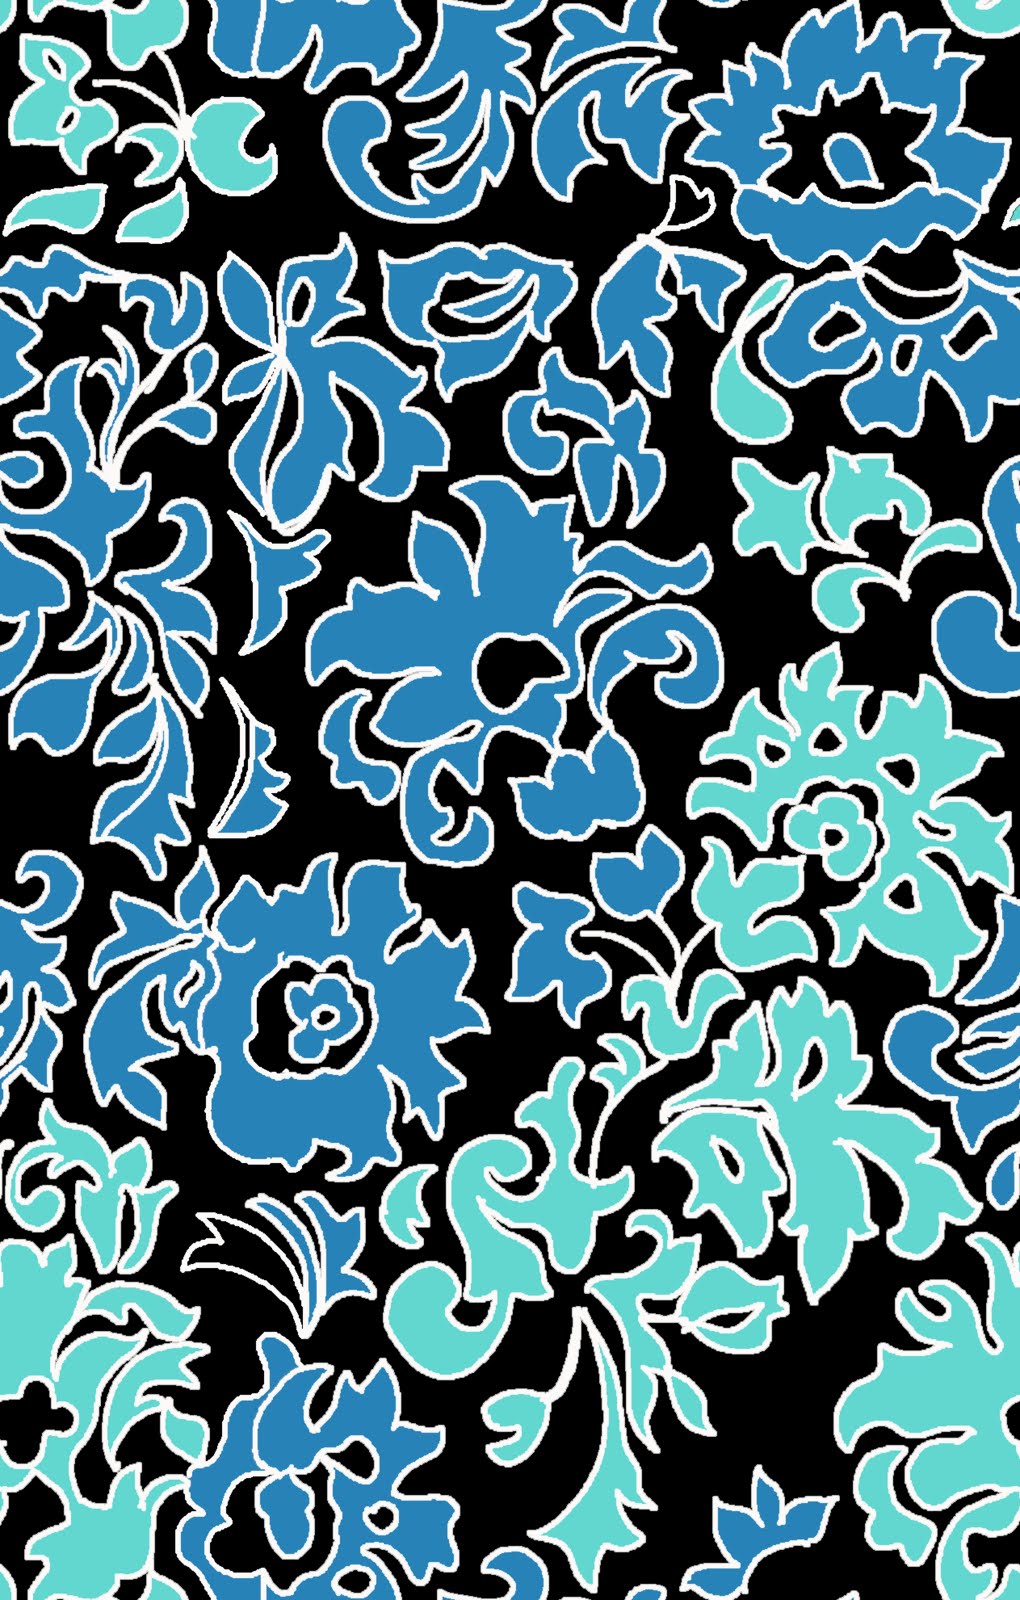 The Floral All over Print Design